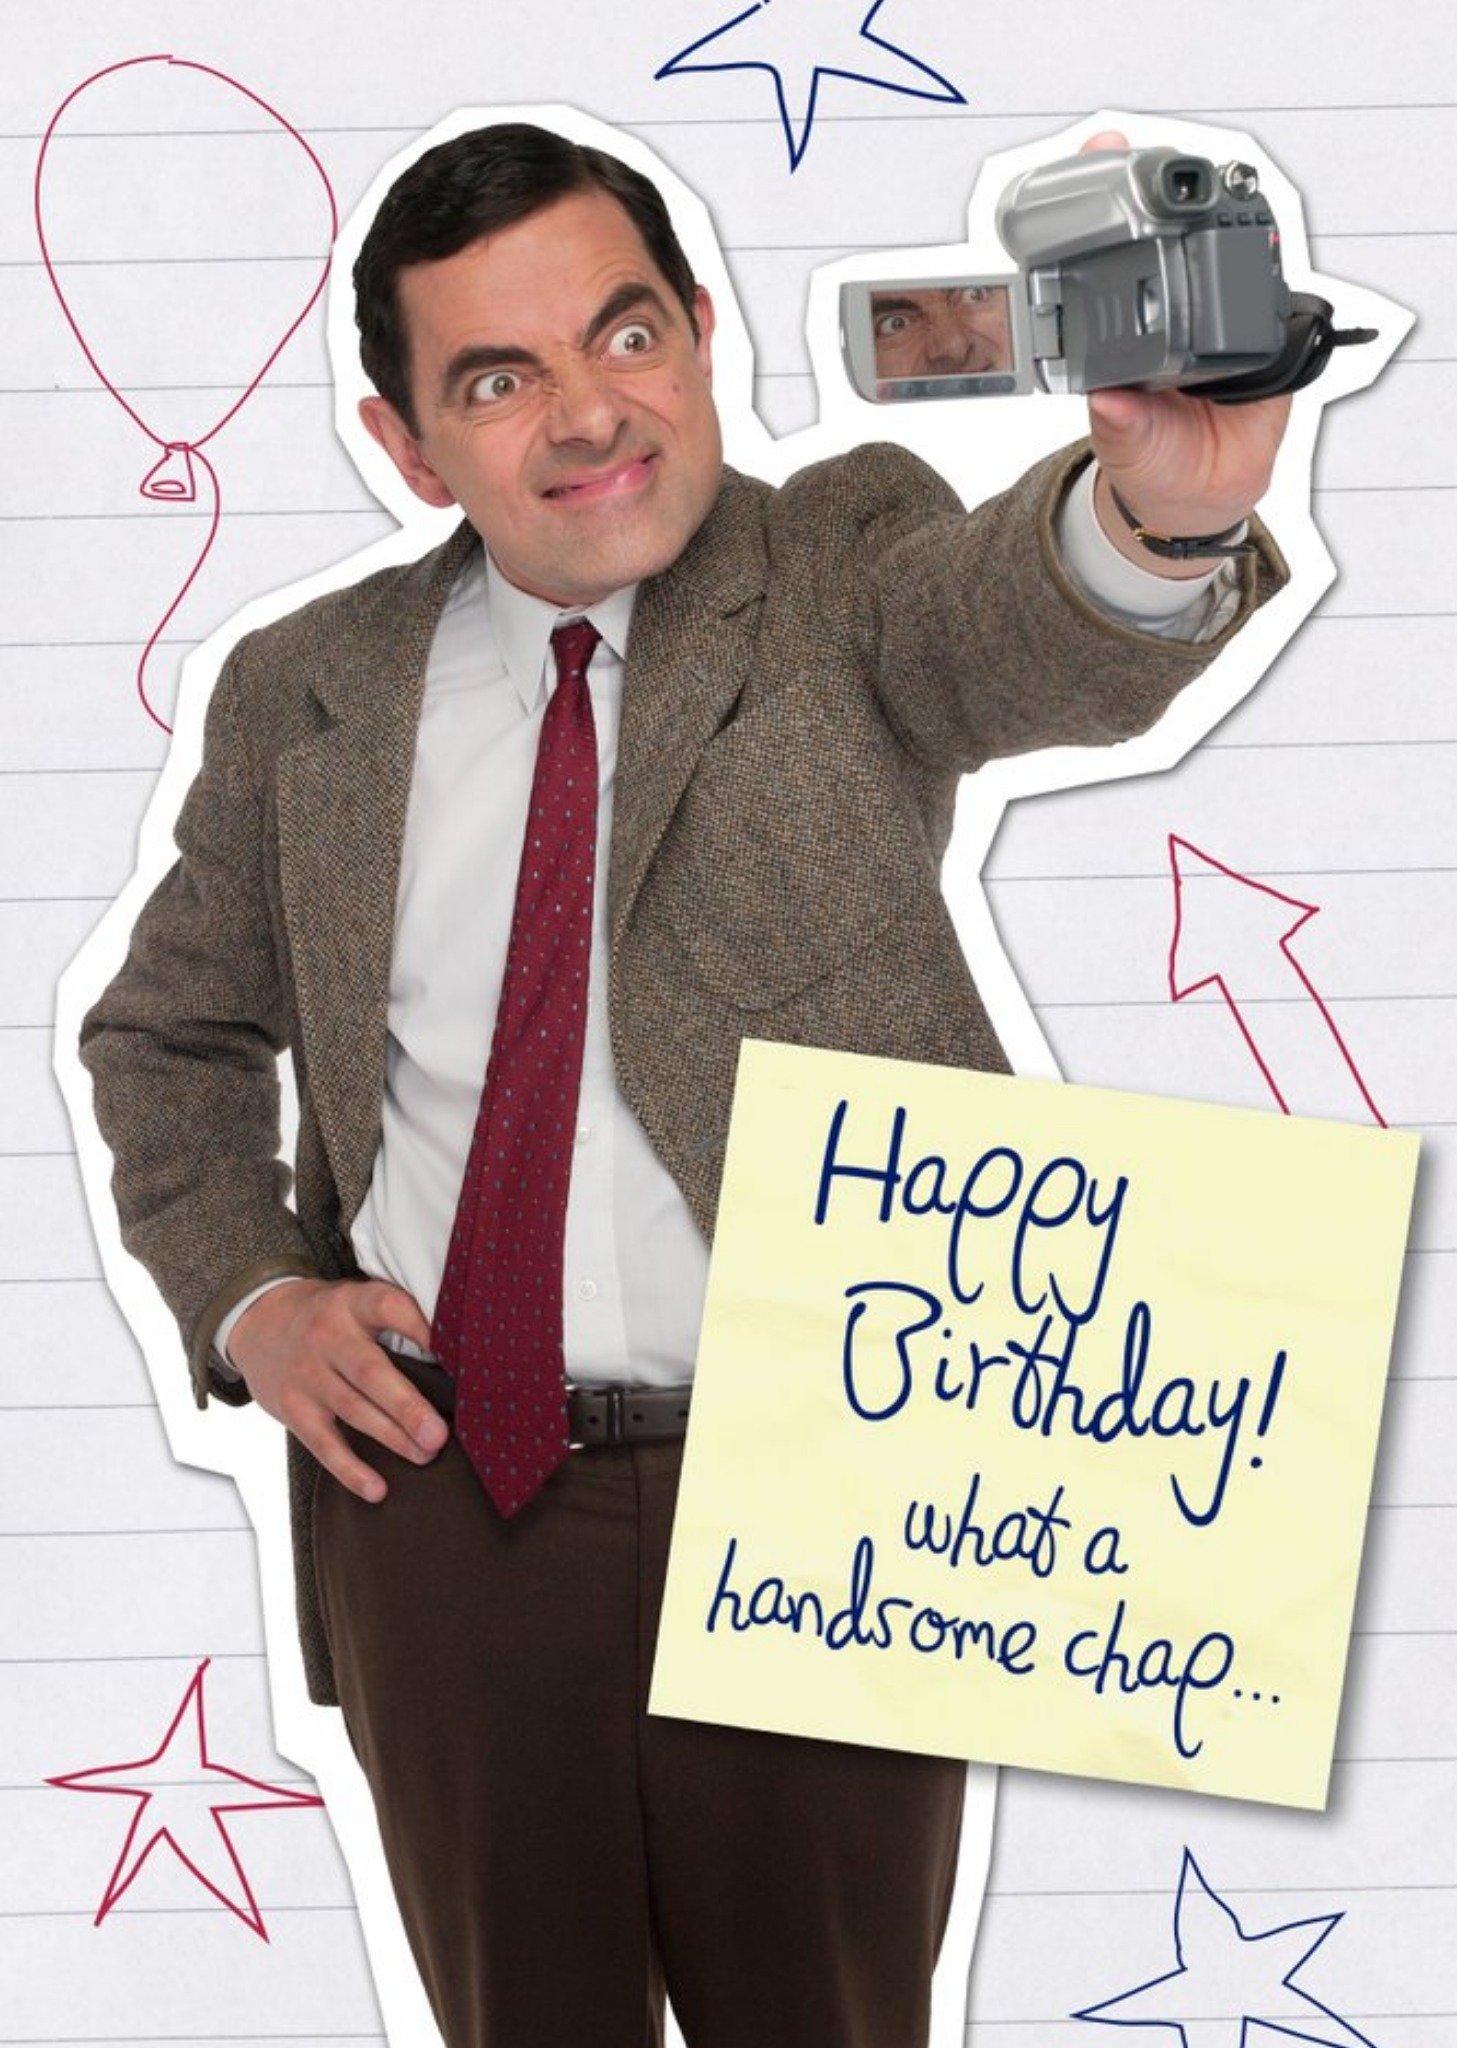 Moonpig Funny Mr Bean Handsome Chap Birthday Card, Large